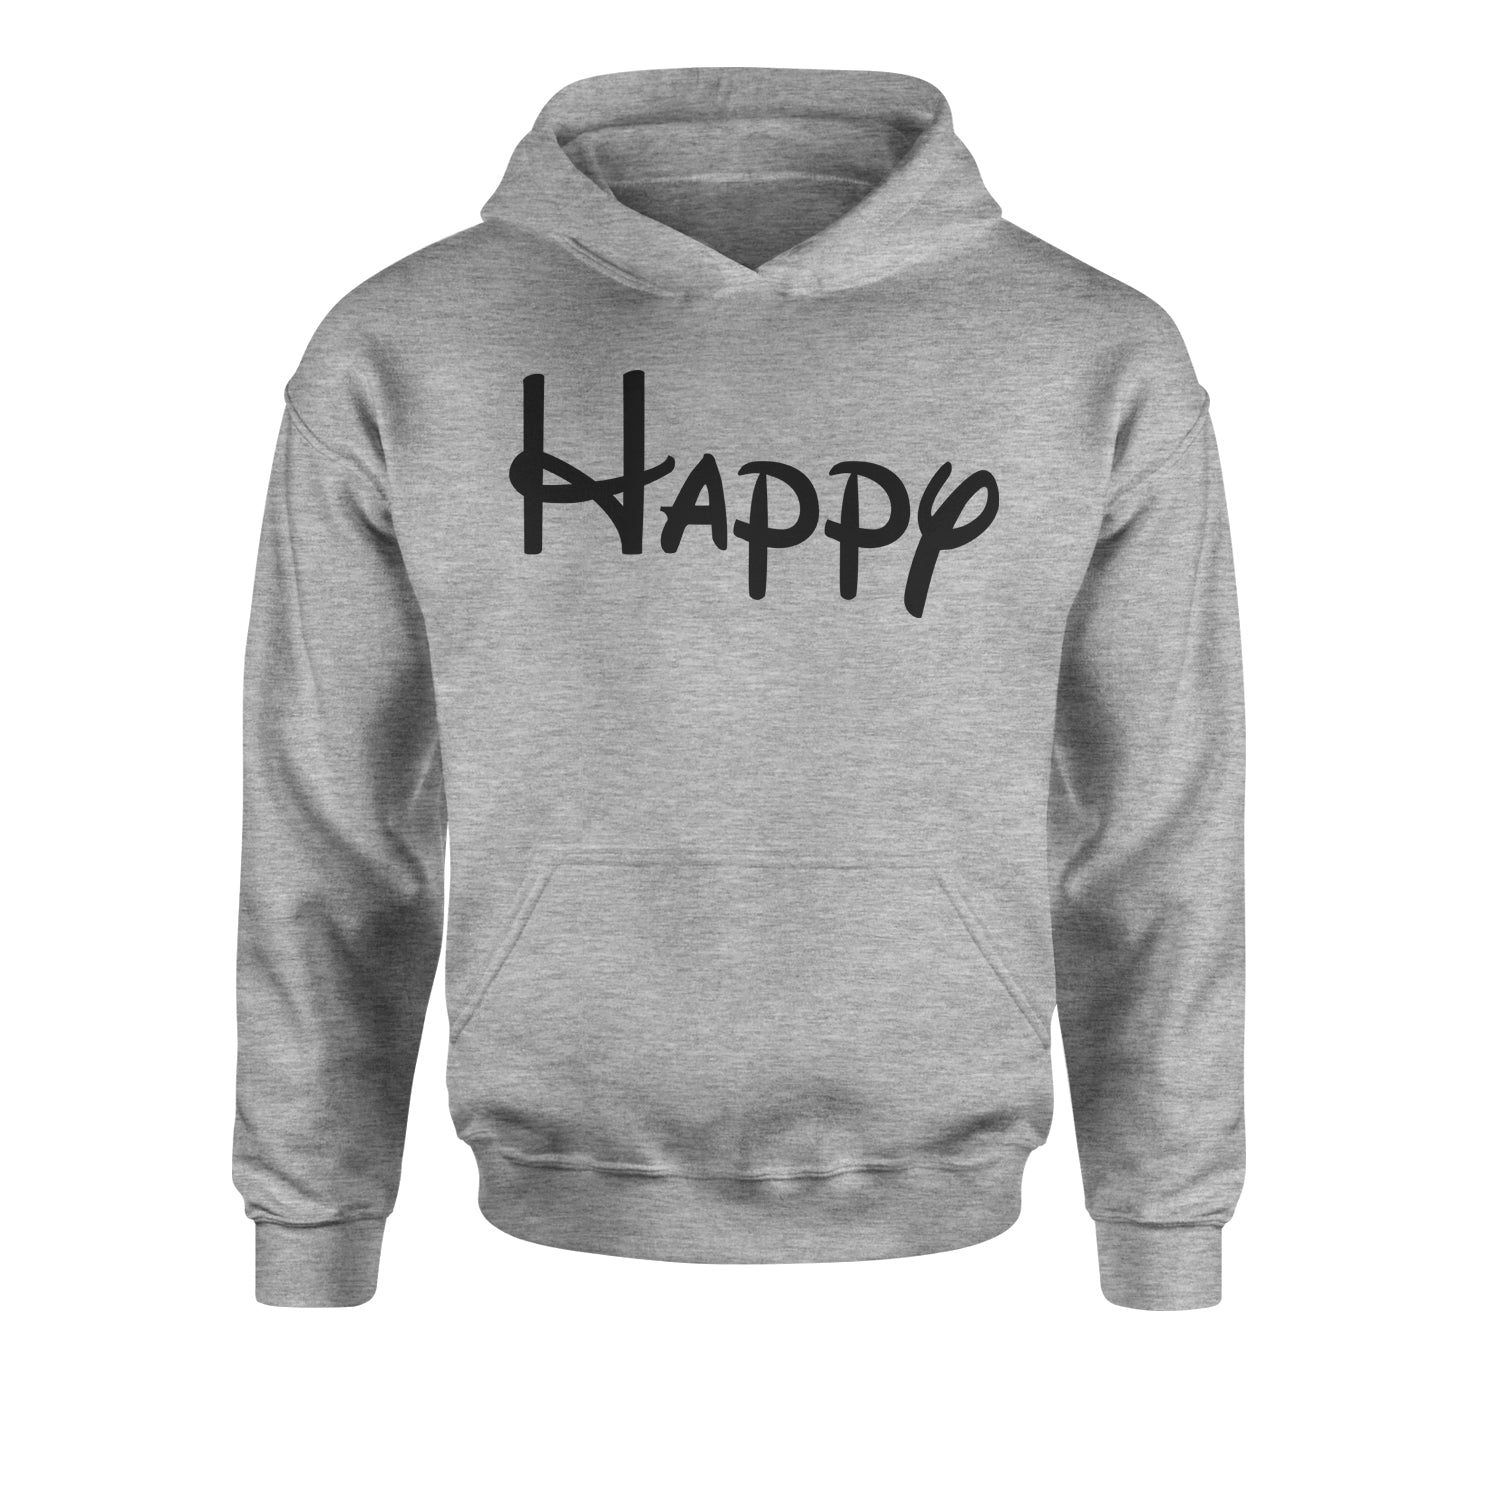 Happy - 7 Dwarfs Costume Youth-Sized Hoodie and, costume, dwarfs, group, halloween, matching, seven, snow, the, white by Expression Tees